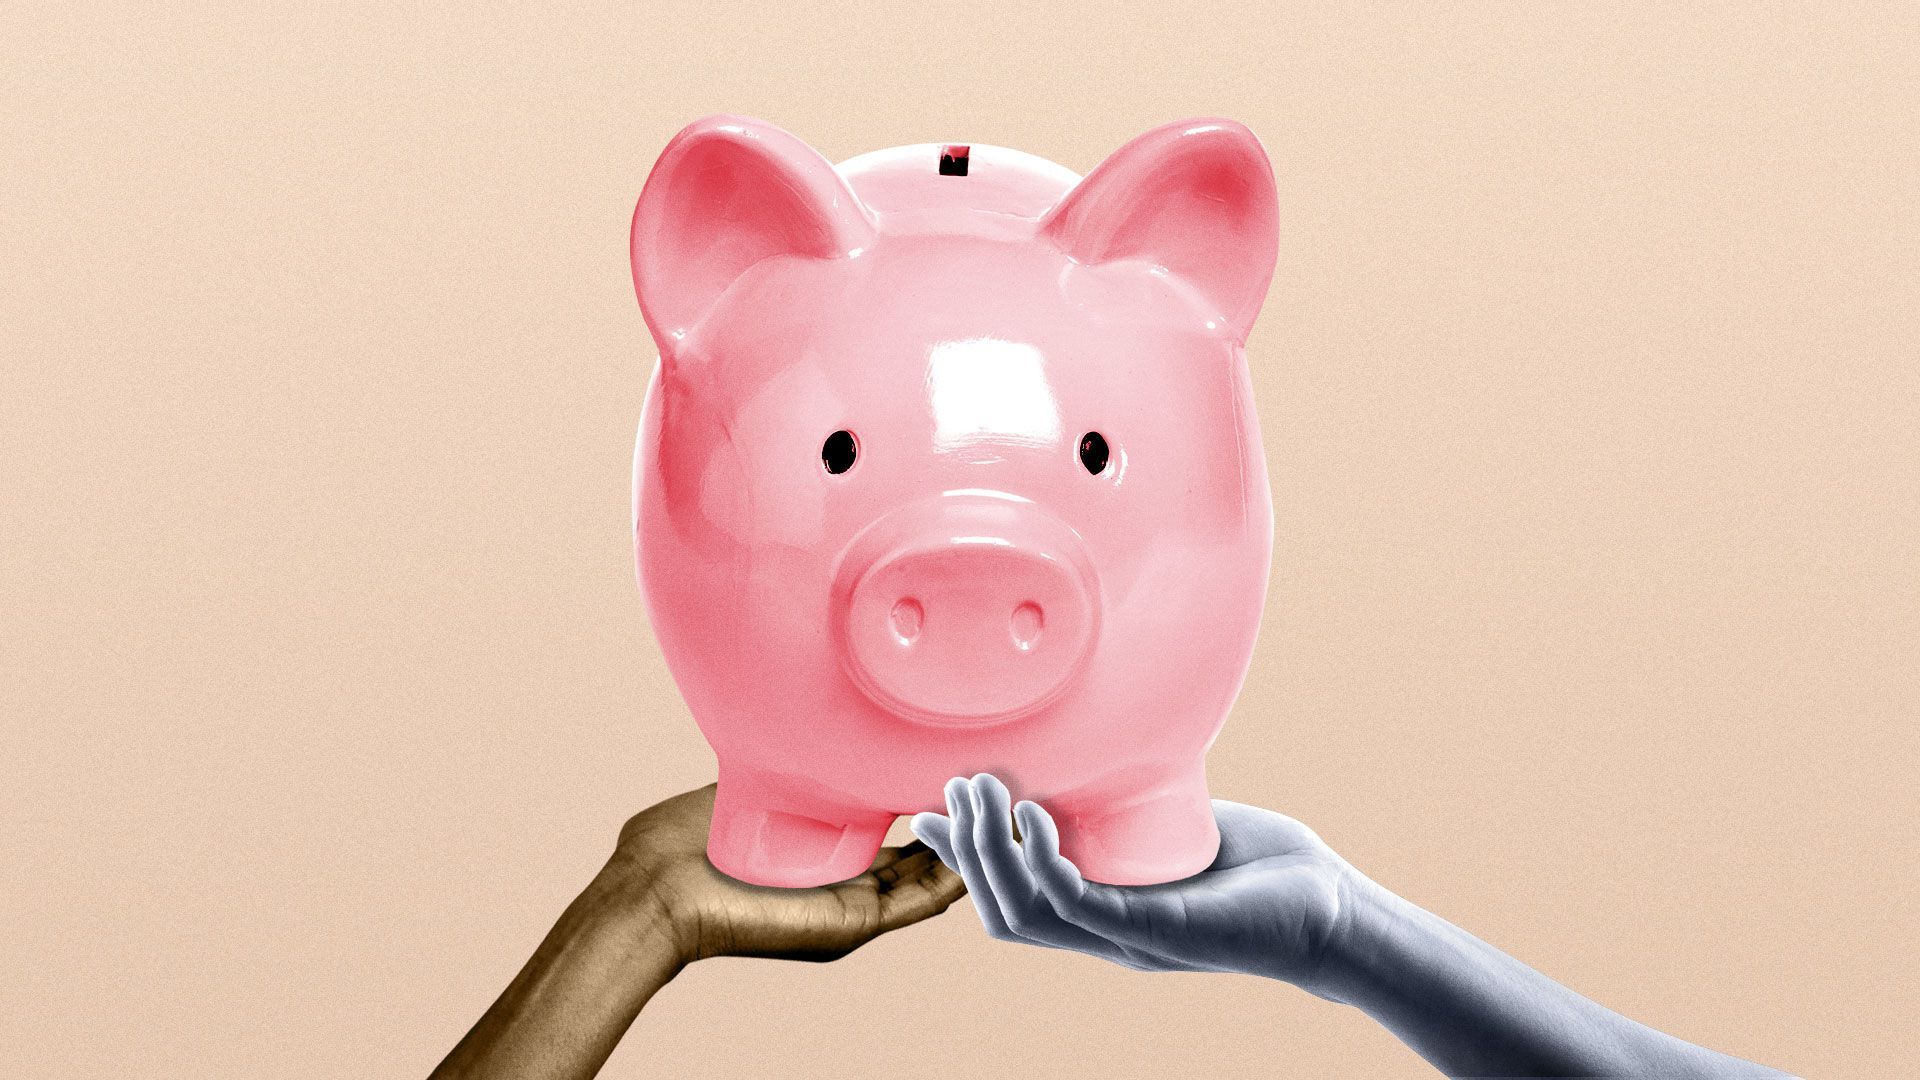 Illustration of two different hands holding a piggy bank